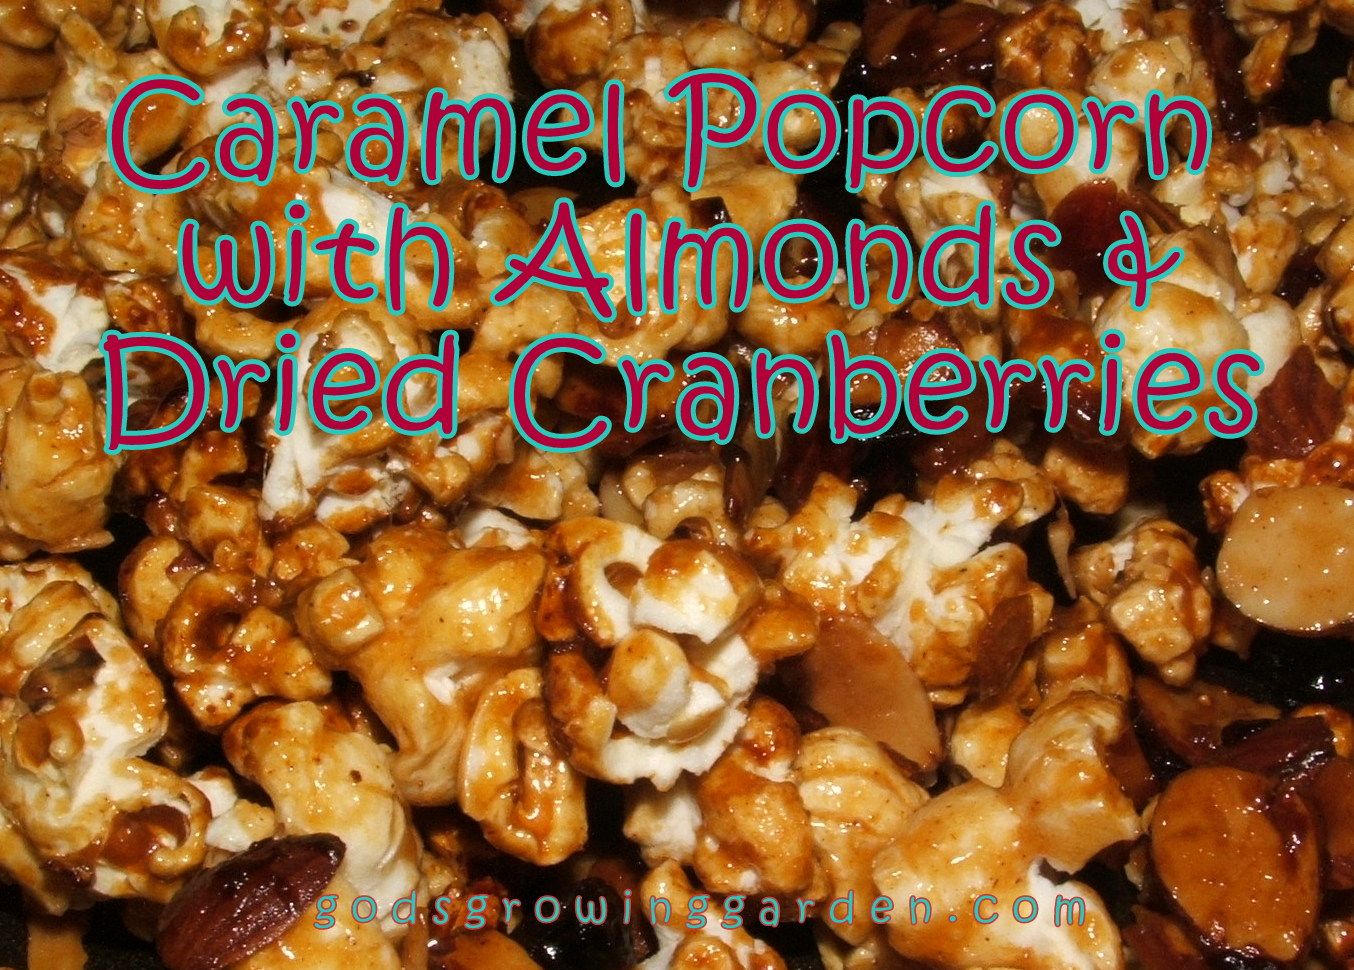 caramel popcorn by Angie Ouellette-Tower for godsgrowinggarden.com photo 009_zps93cc7ac8.jpg